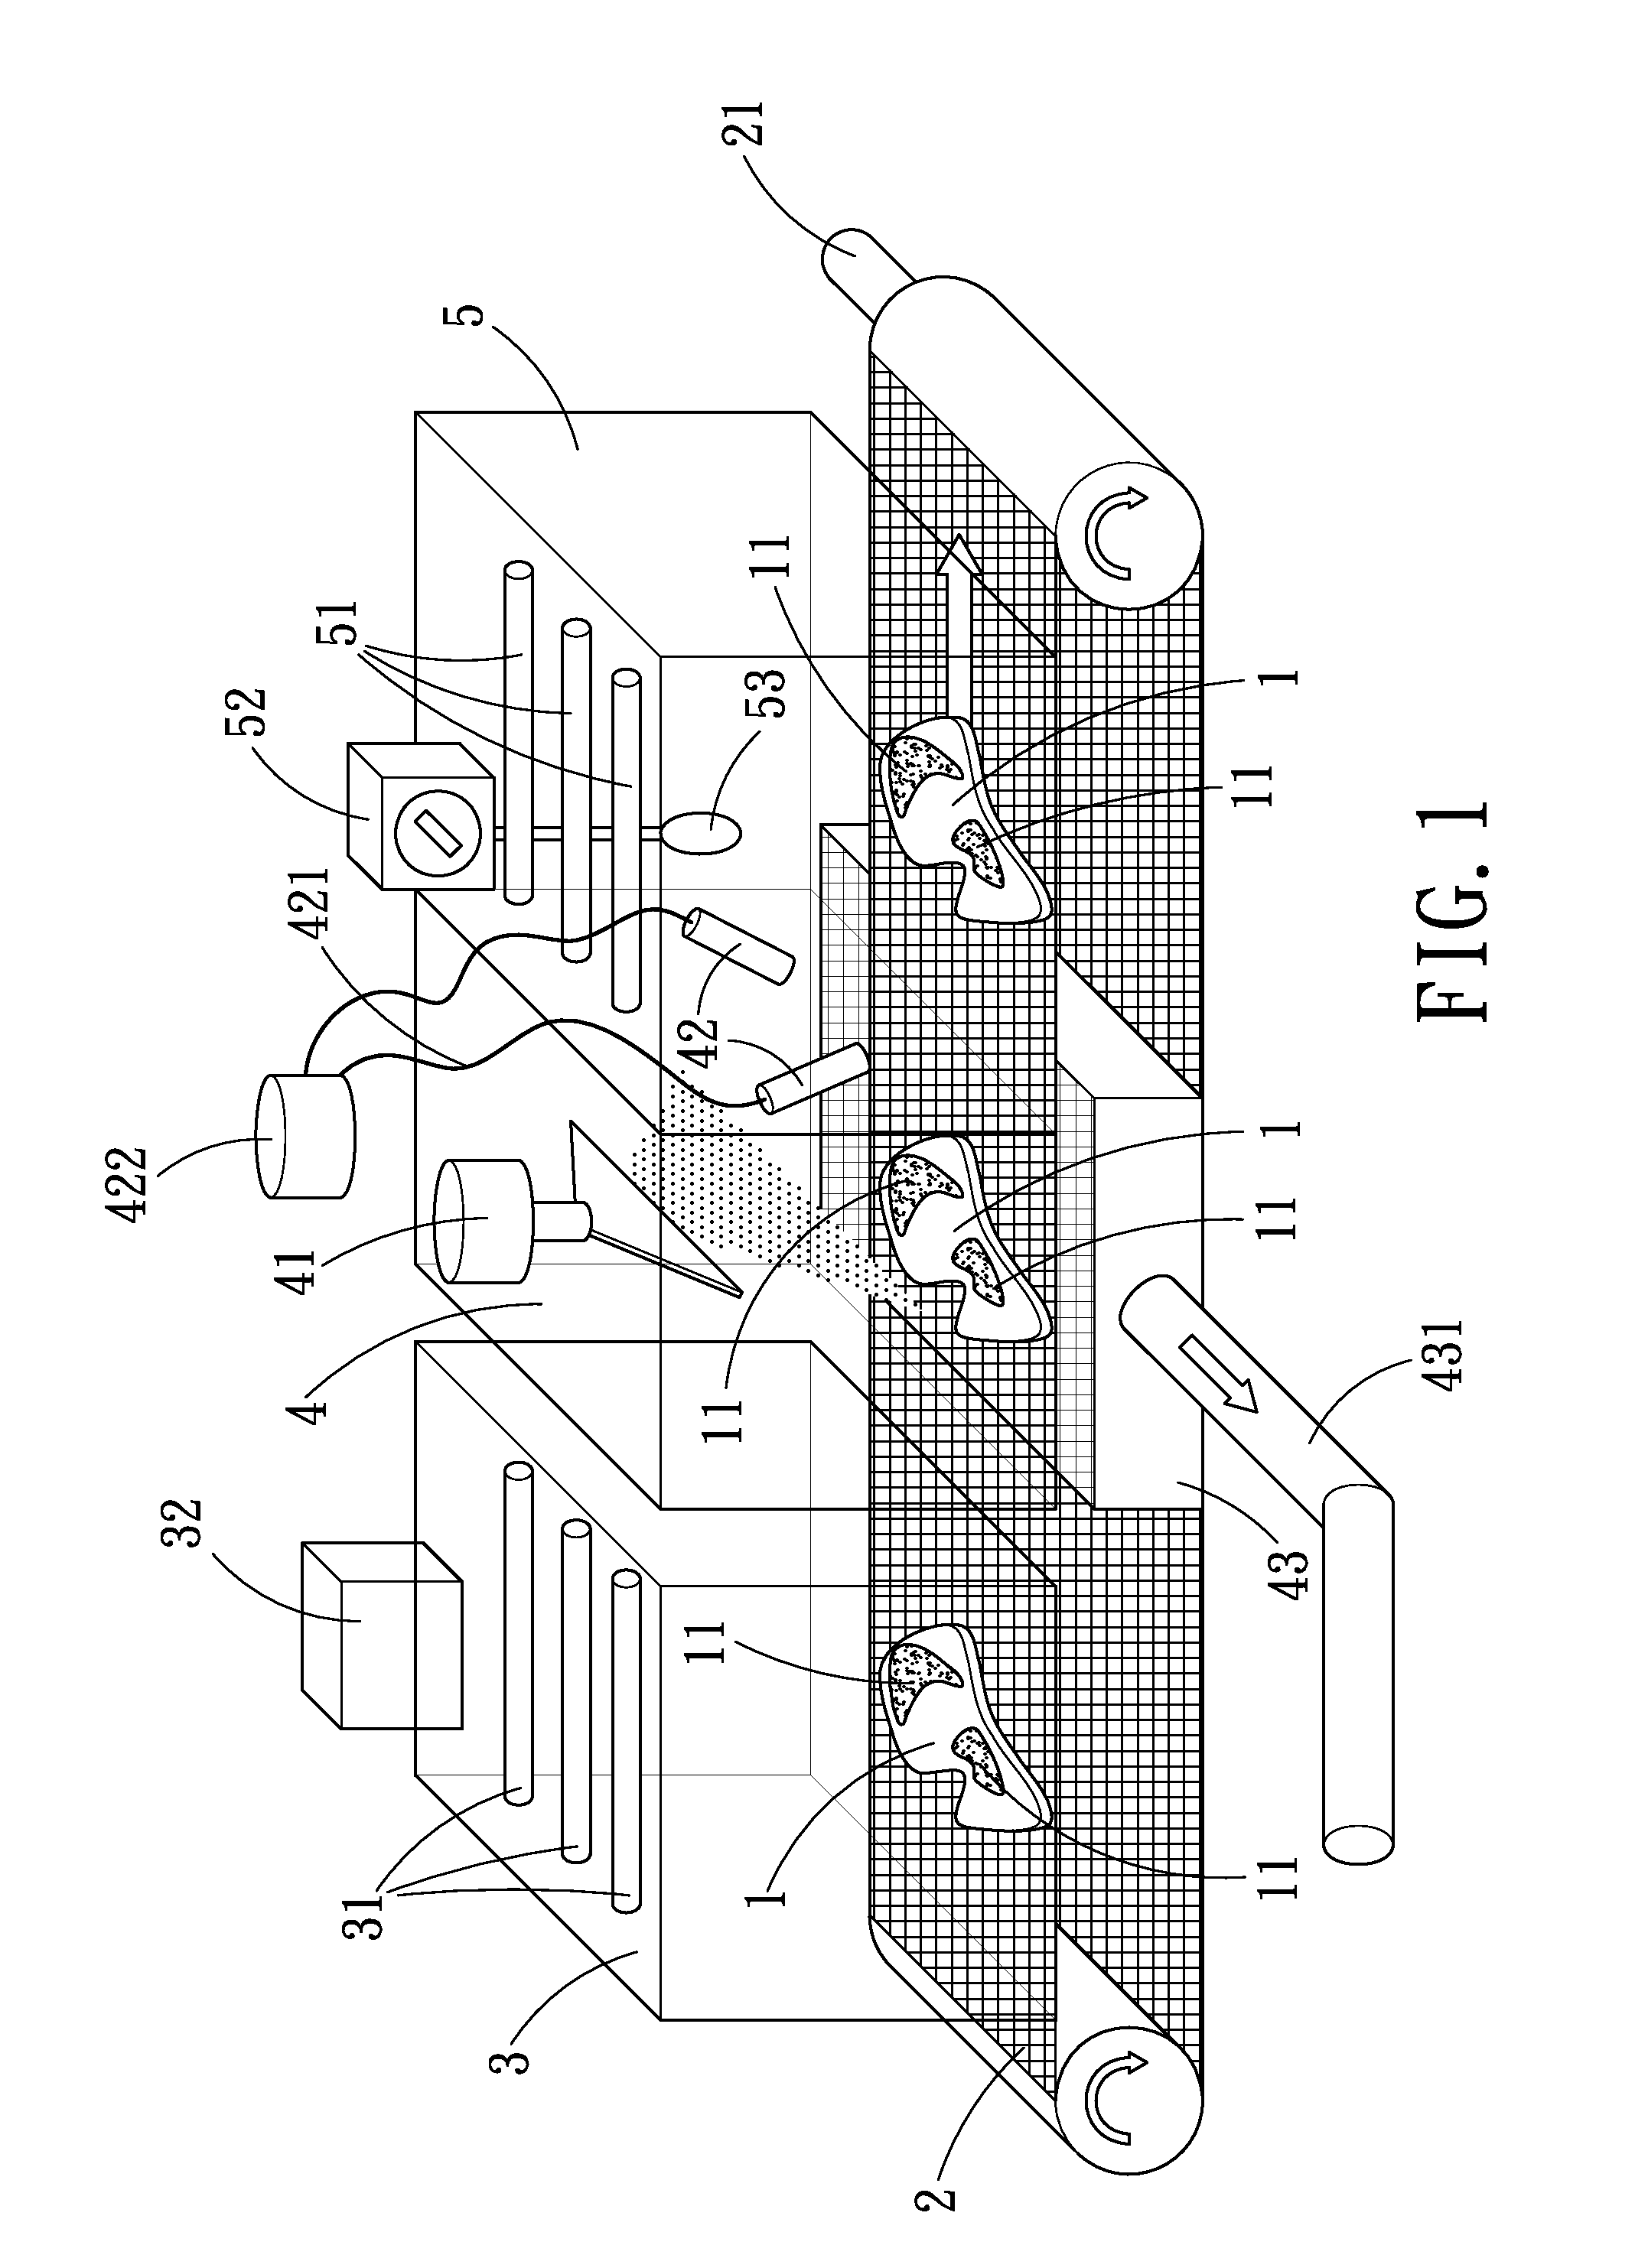 Method and System for Applying Hot Melt Adhesive Powder onto a Non-Metallic Object Surface